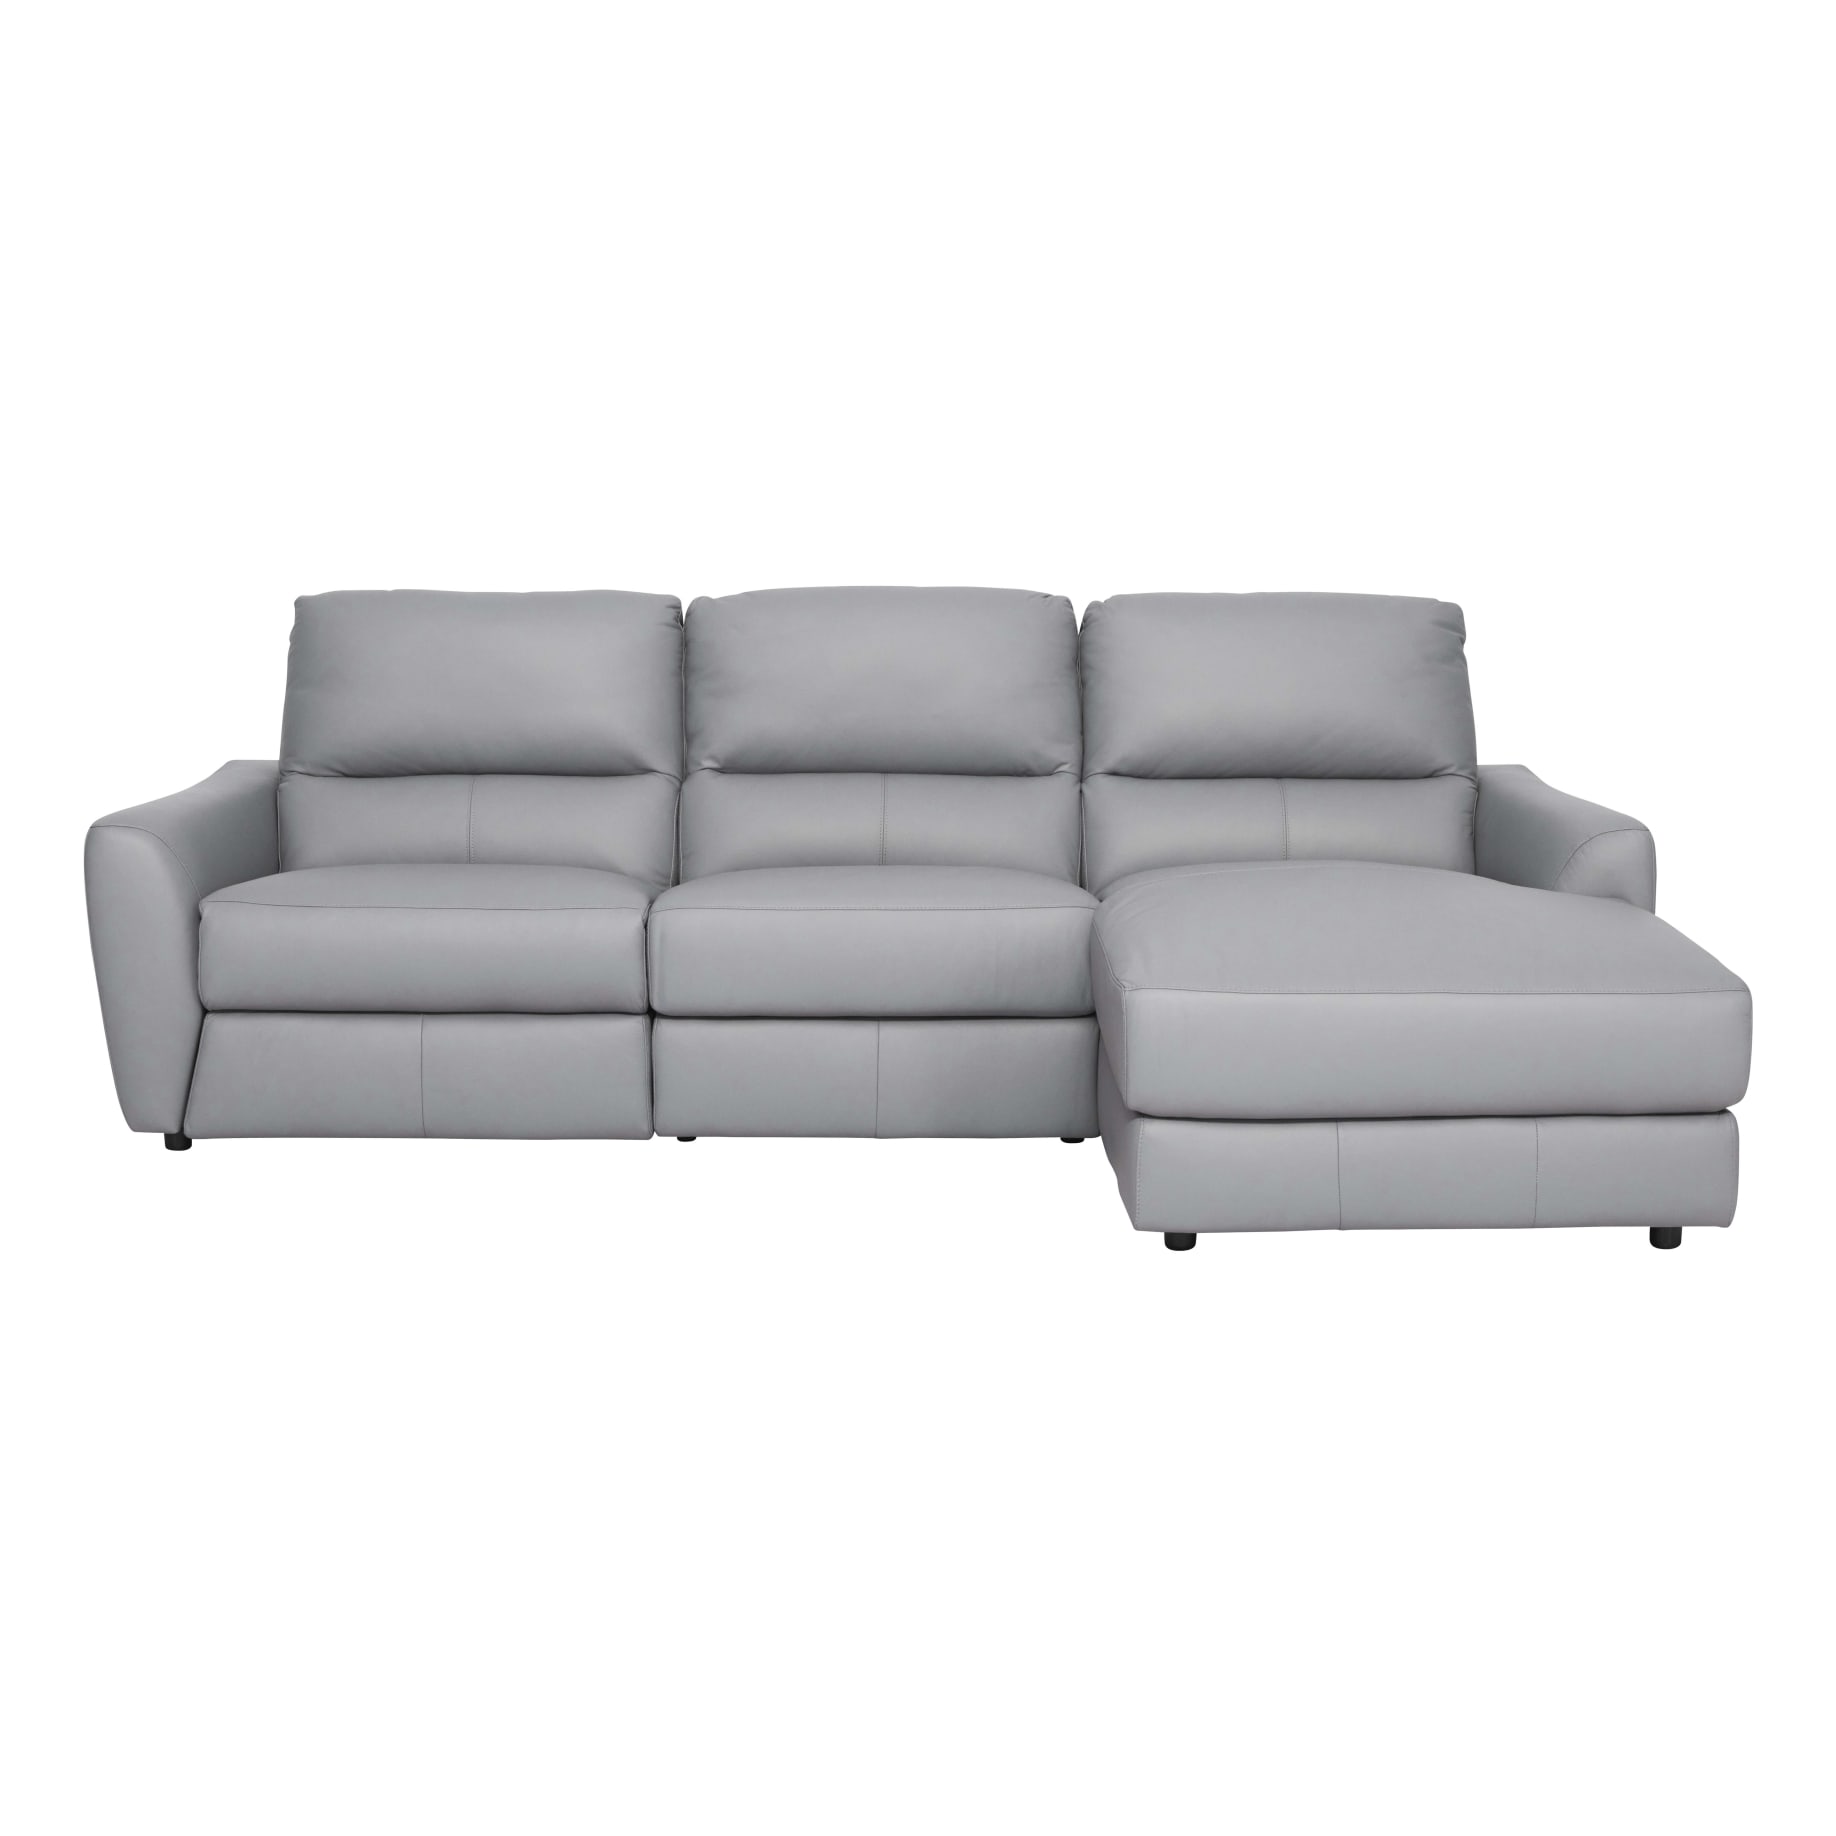 Portland 3 Seater Recliner Sofa + Chaise RHF in Leather Pewter